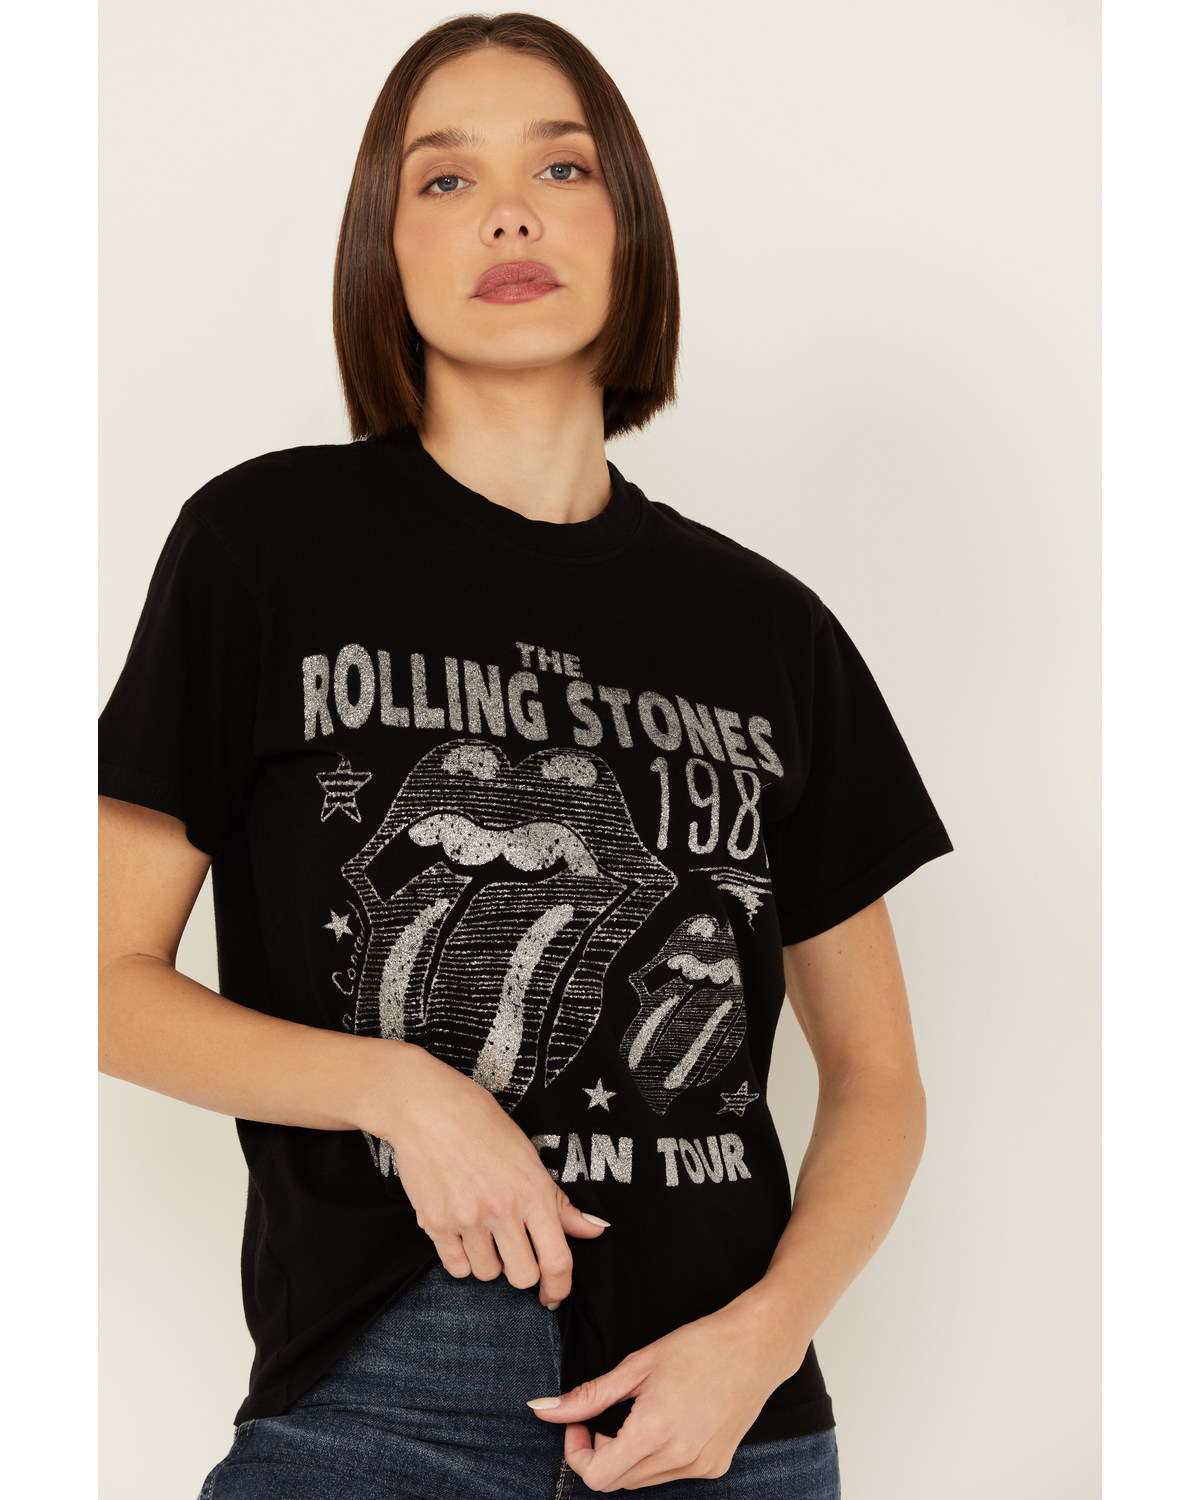 People Of Leisure Women's Rolling Stones 1981 American Tour Glitter Short Sleeve Graphic Tee